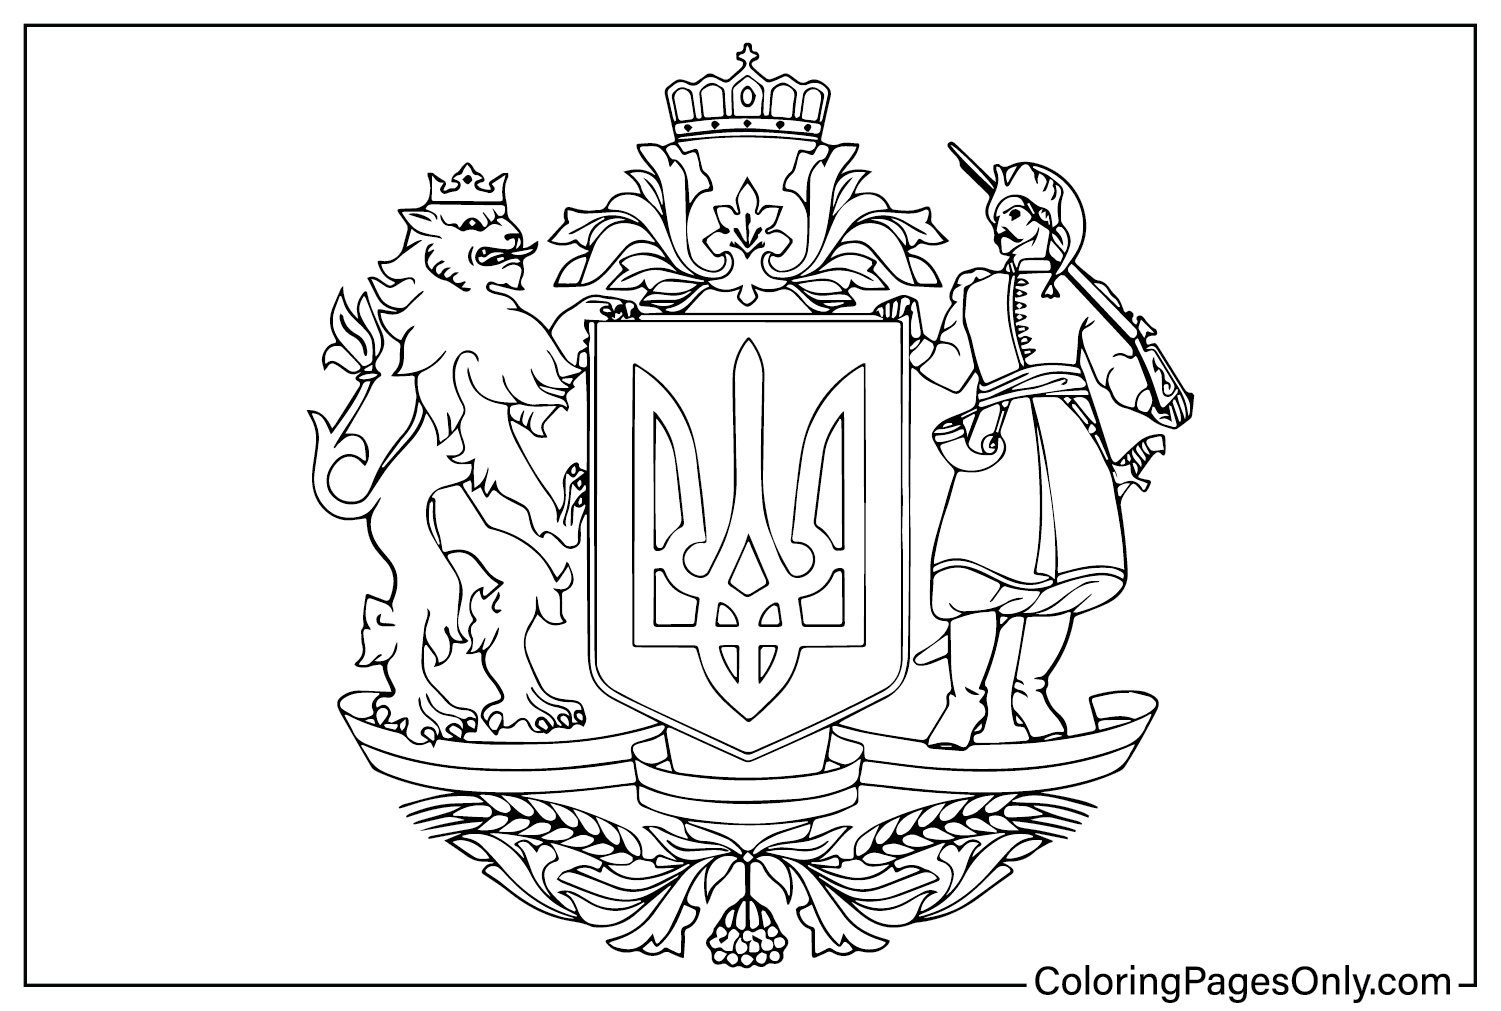 Coat of Arms Ukraine Coloring Page from Ukraine